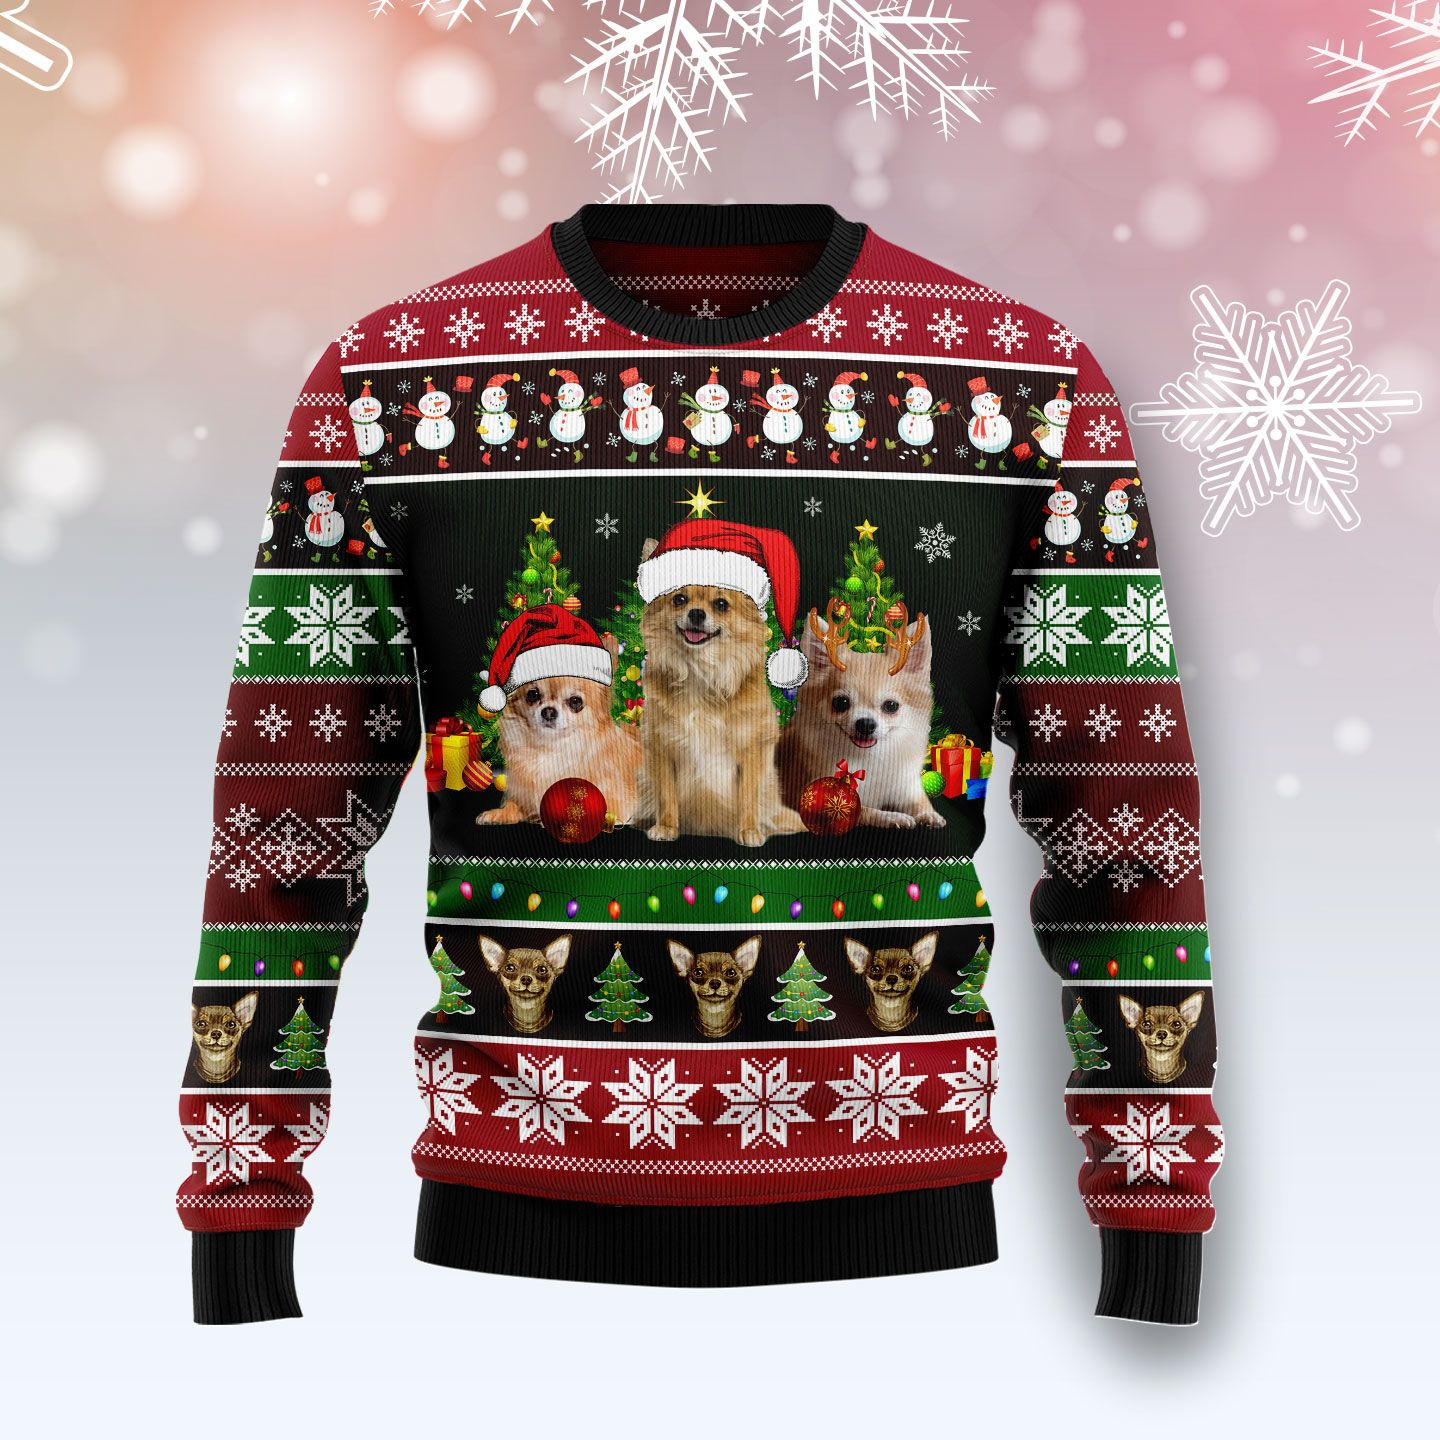 Chihuahua Group Beauty Ugly Christmas Sweater Ugly Sweater For Men Women